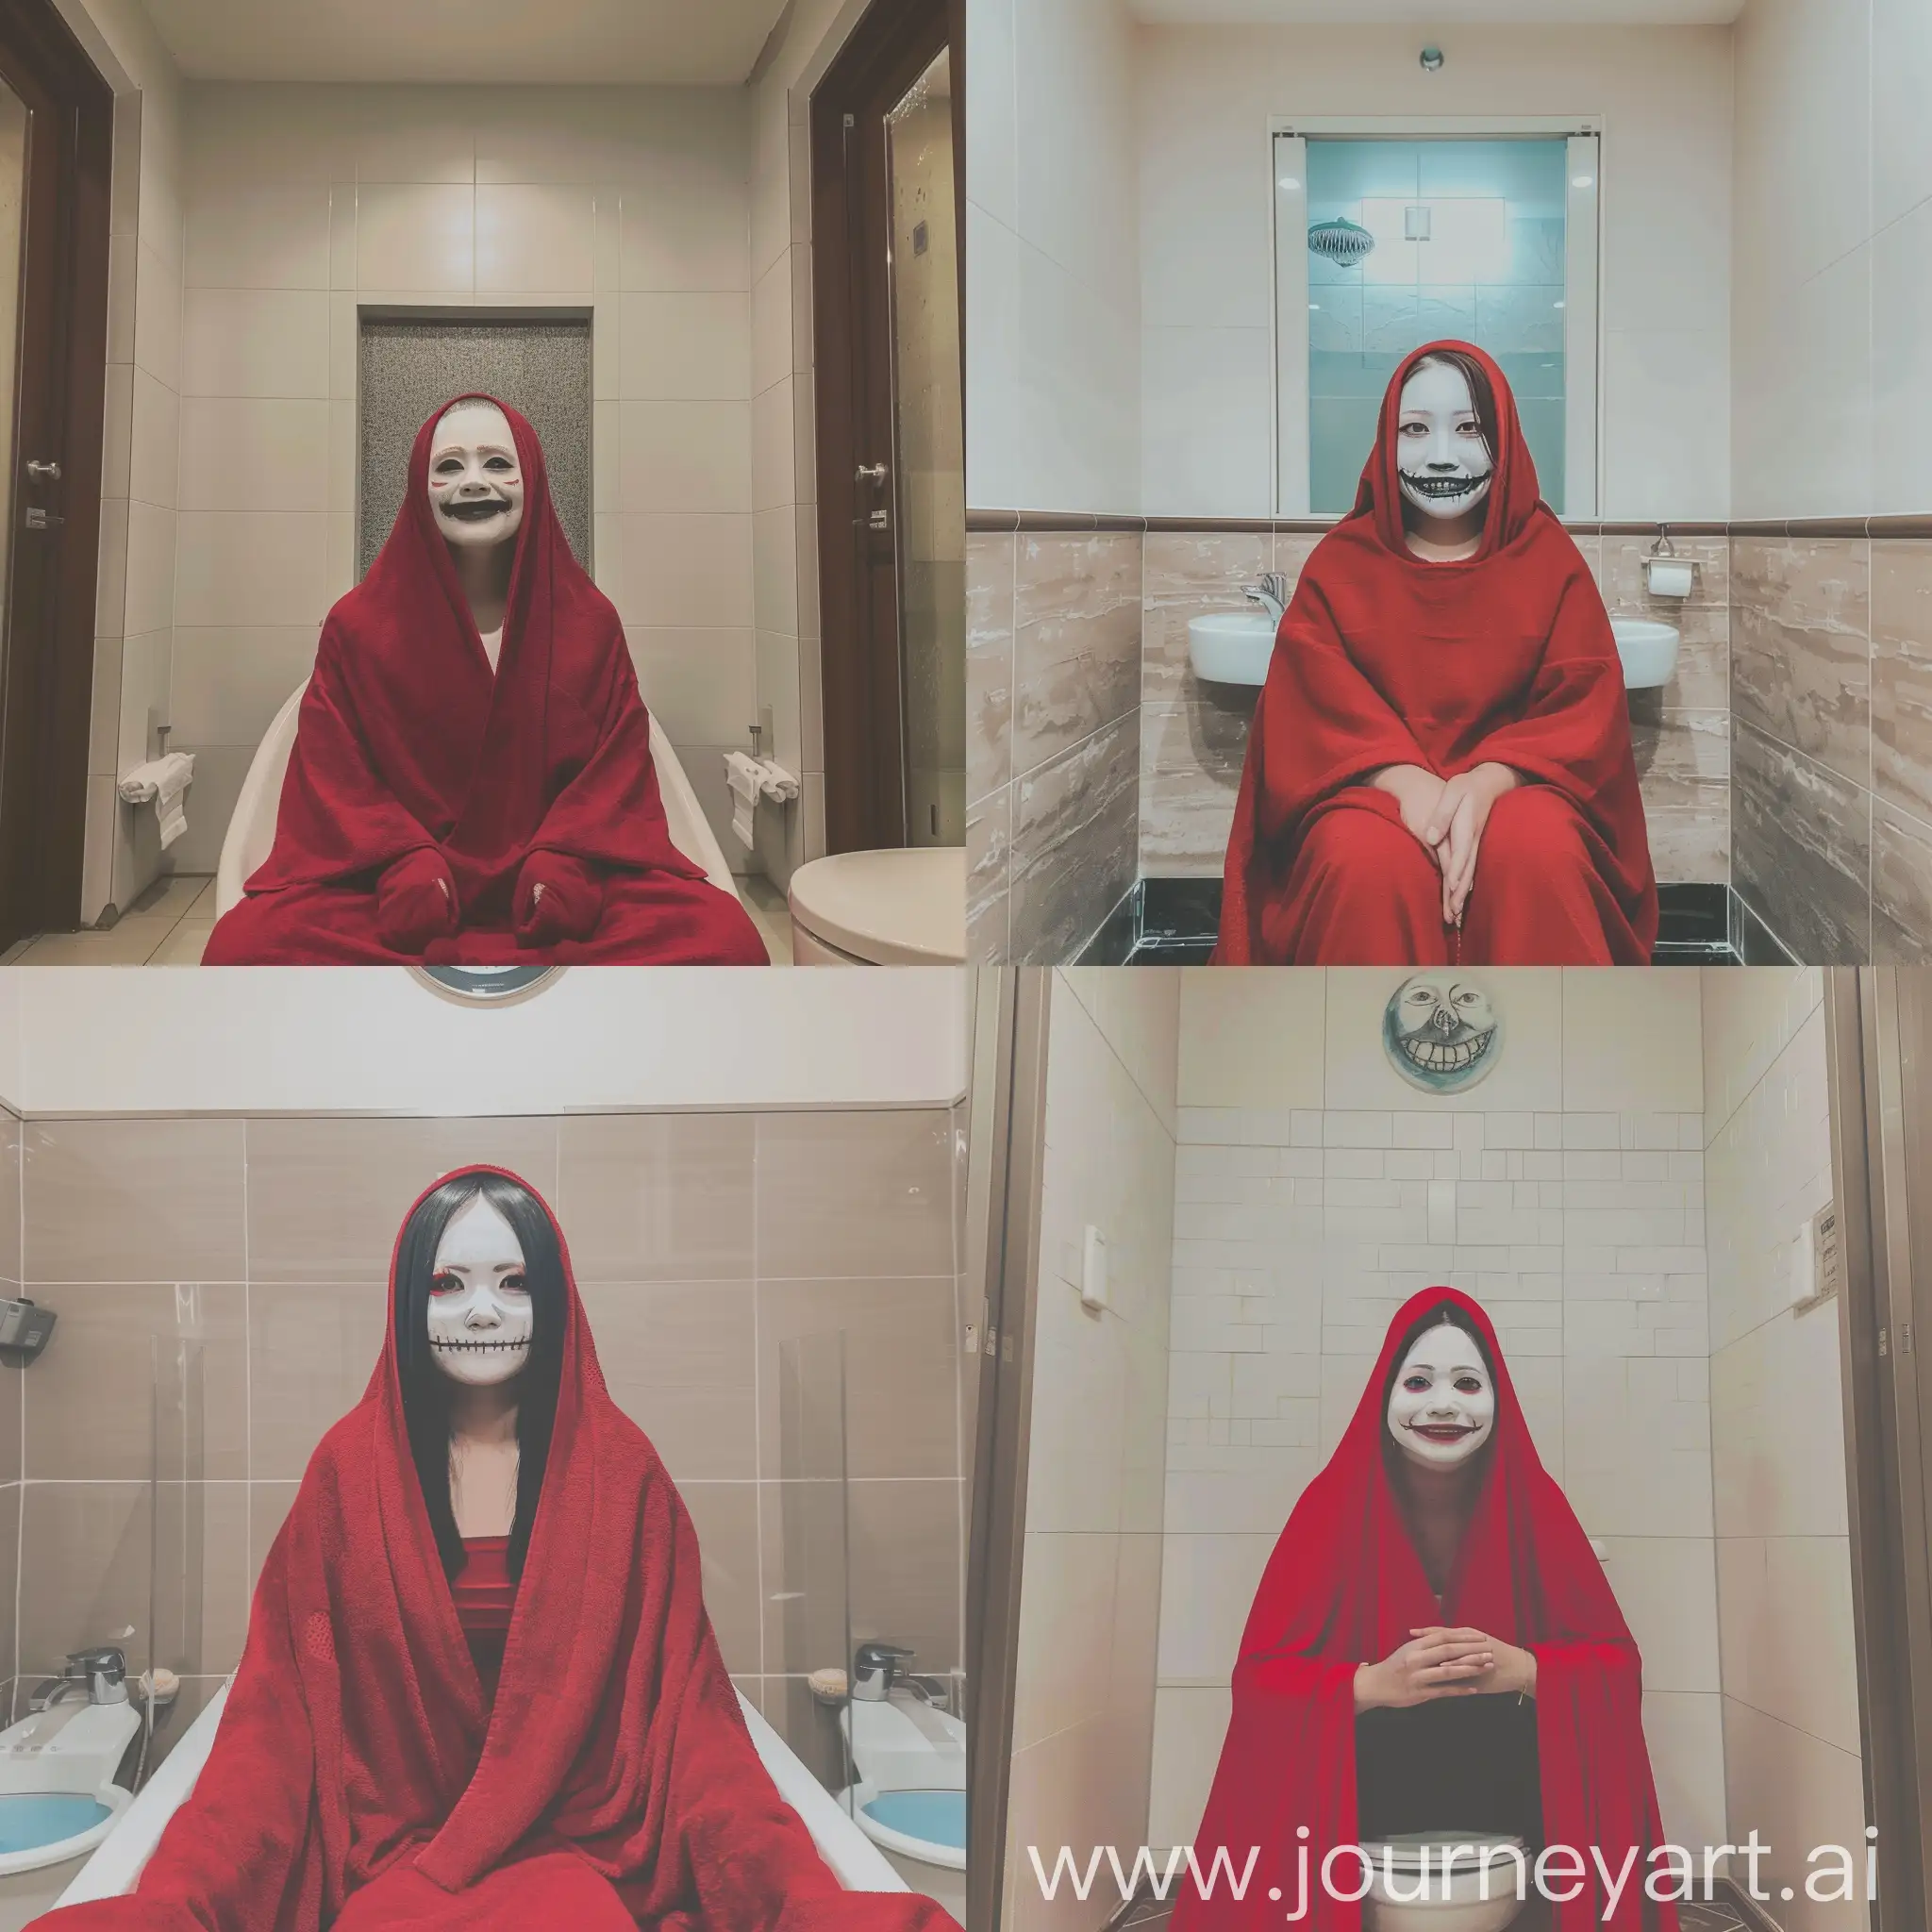 Character from Japanese folklore aka cloak, sitting inside the bathroom covered with a red cloak and her face is white and hairless with black eyes and a background with a macabre smile --sref https://encrypted-tbn0.gstatic.com/images?q=tbn:ANd9GcThVeDBuKIoy9Bgy8t4q3QGtqsahdur38Wz2Q